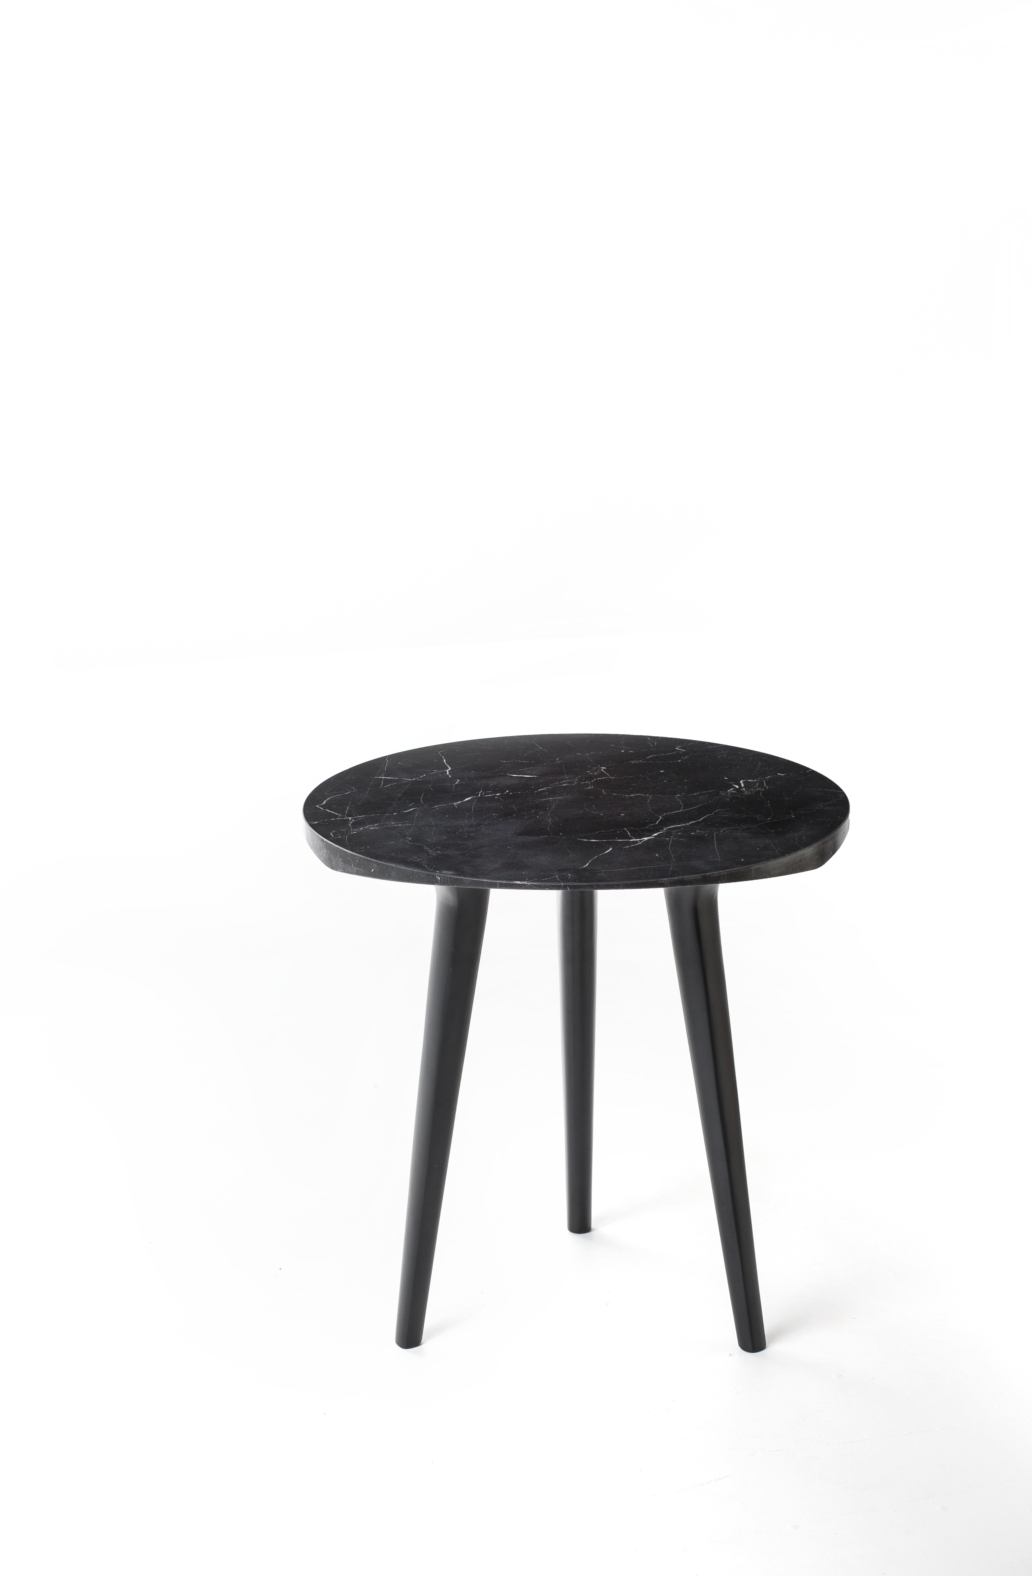 ADEMAR Side Table by Giulio Iacchetti for Bross